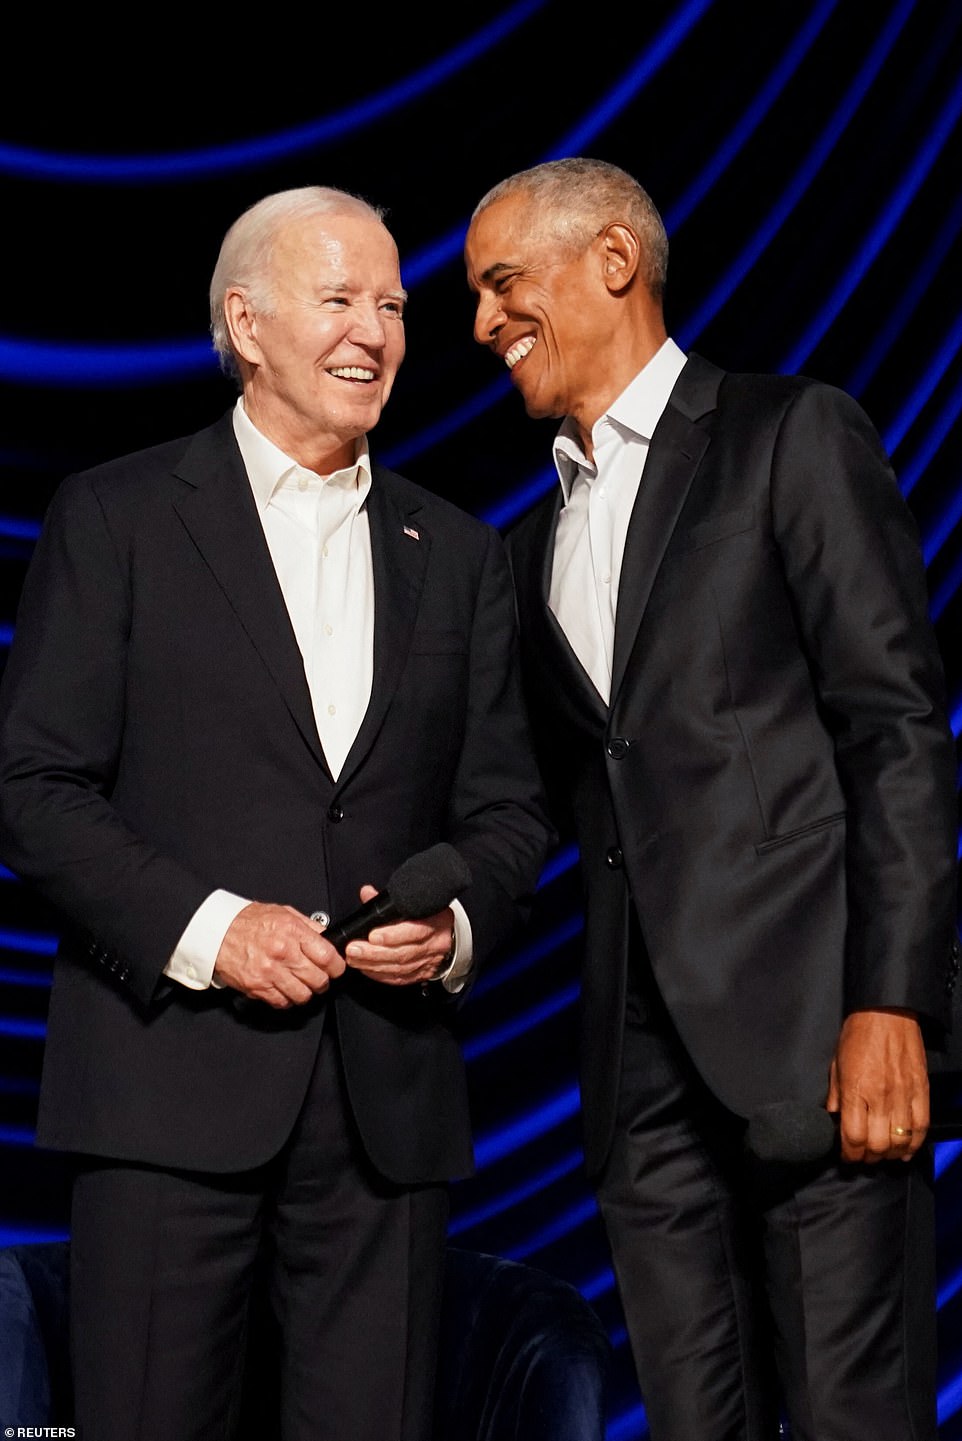 Biden has been in an improved position in recent weeks, although he has not received a major boost from Trump's conviction on charges of falsifying corporate records after his trial in Manhattan.